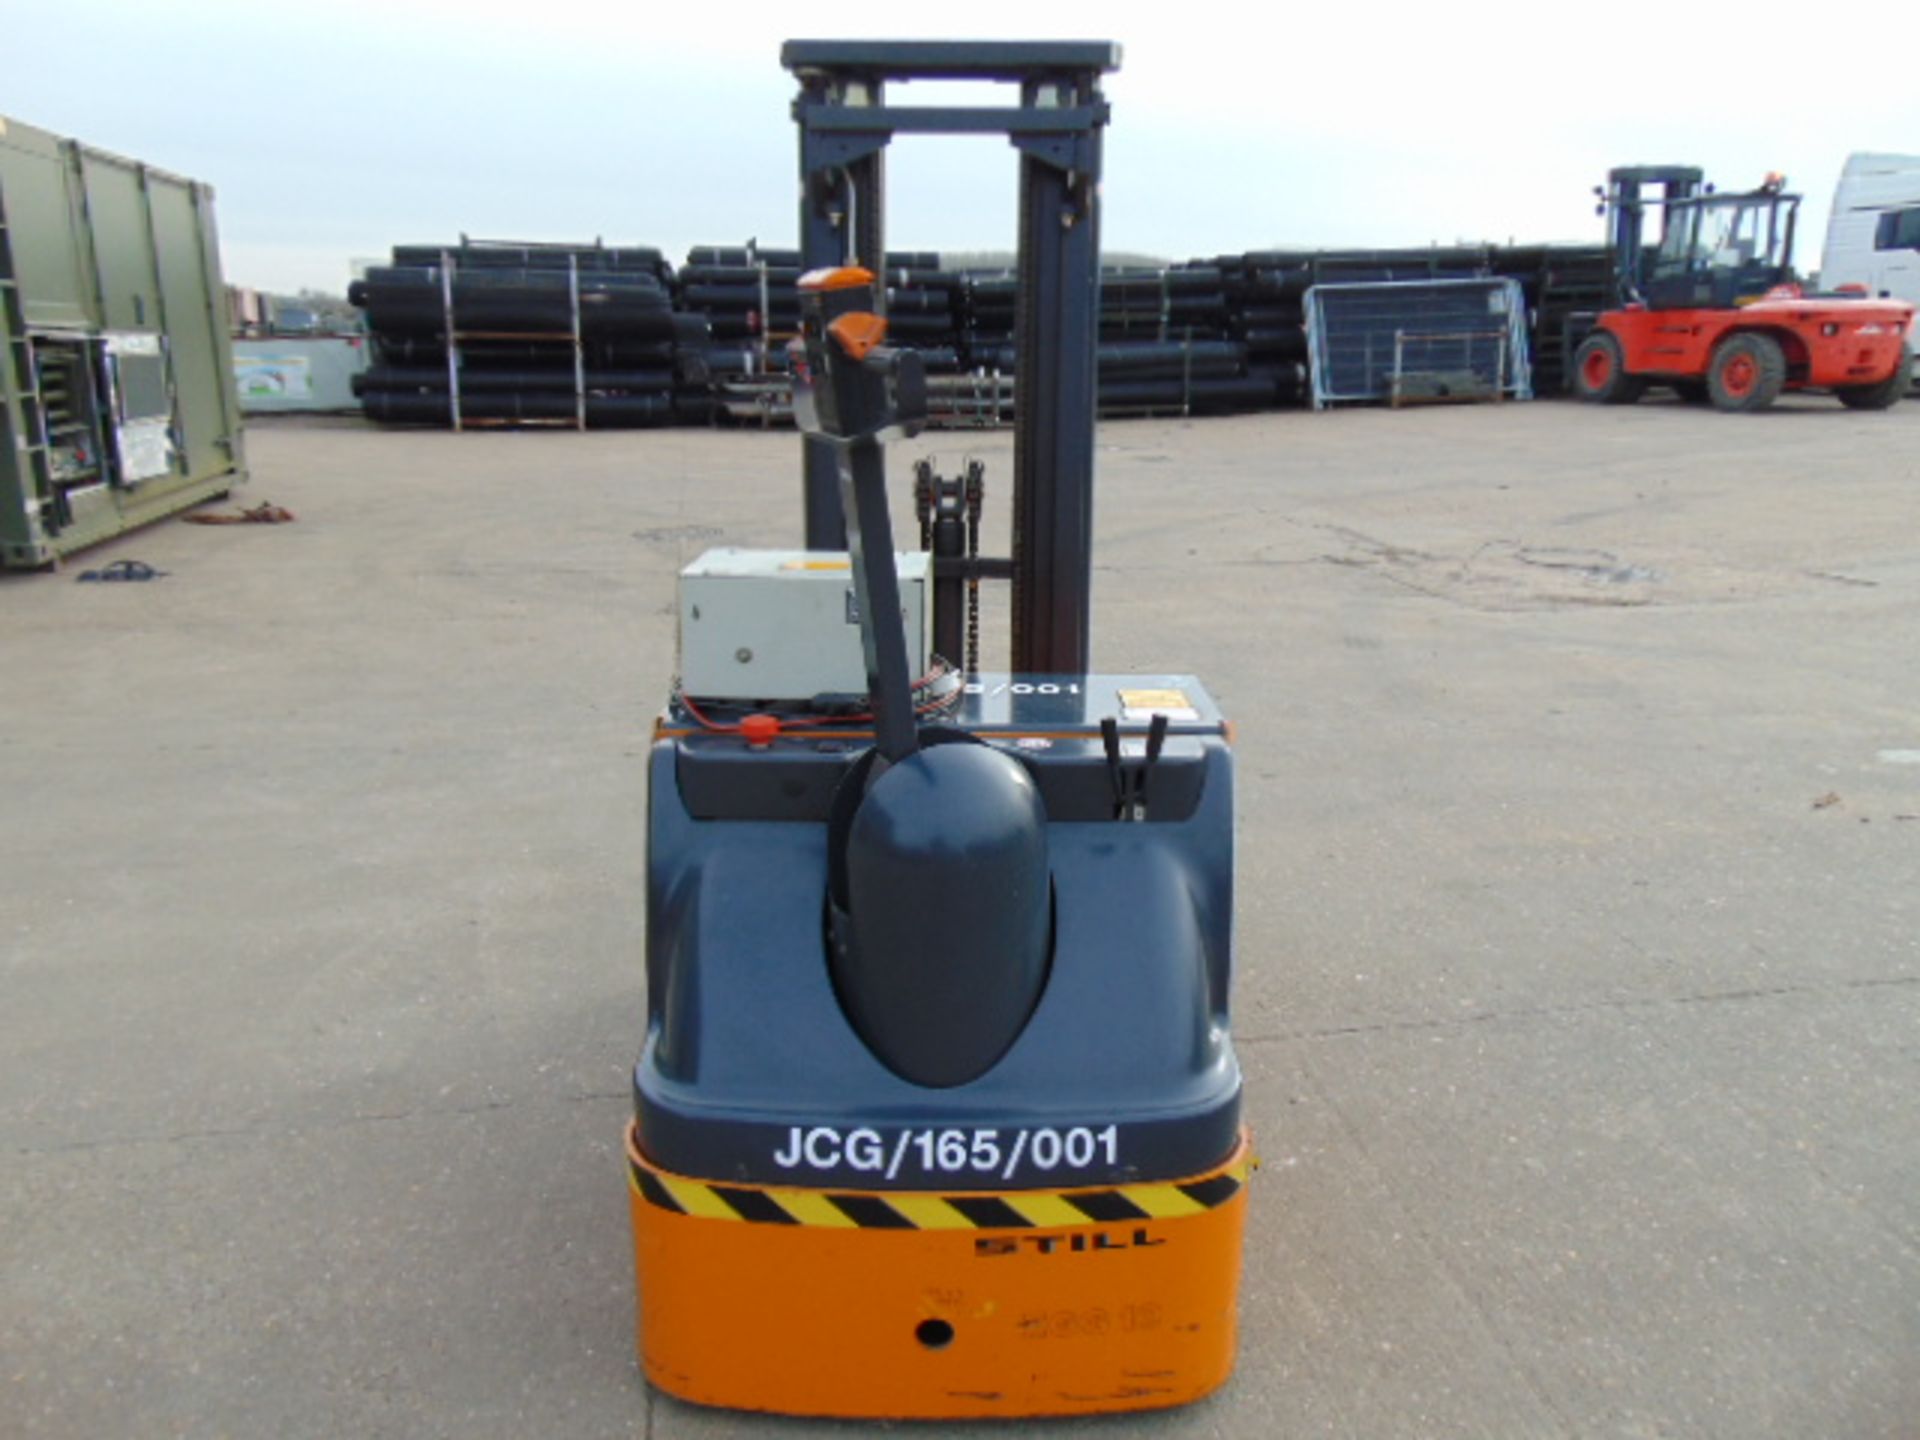 Still EGG10 Electric Pedestrian Pallet Stacker c/w Charger - Image 6 of 19